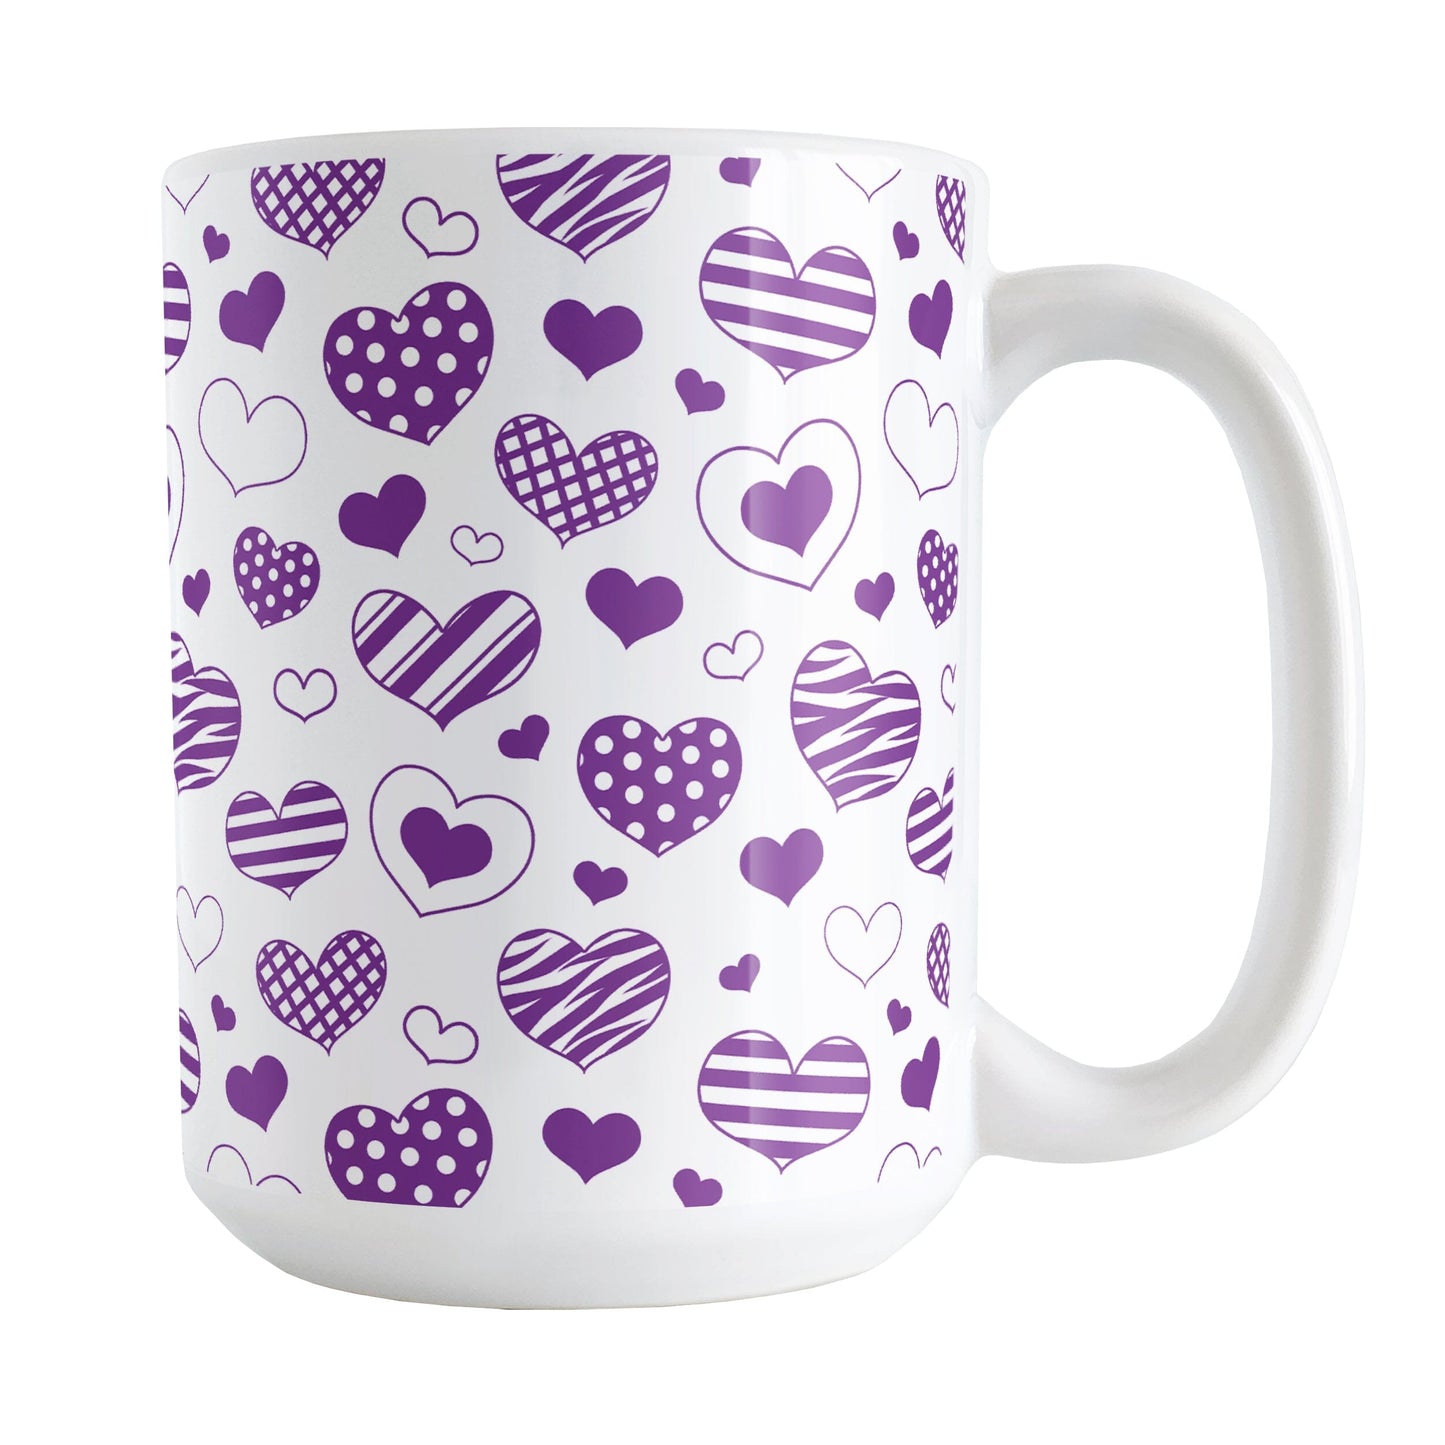 Purple Heart Doodles Mug (15oz) at Amy's Coffee Mugs. A ceramic coffee mug designed with hand-drawn purple heart doodles in a pattern that wraps around the cup. This cute heart pattern is perfect for Valentine's Day or for anyone who loves hearts and young-at-heart drawings. 